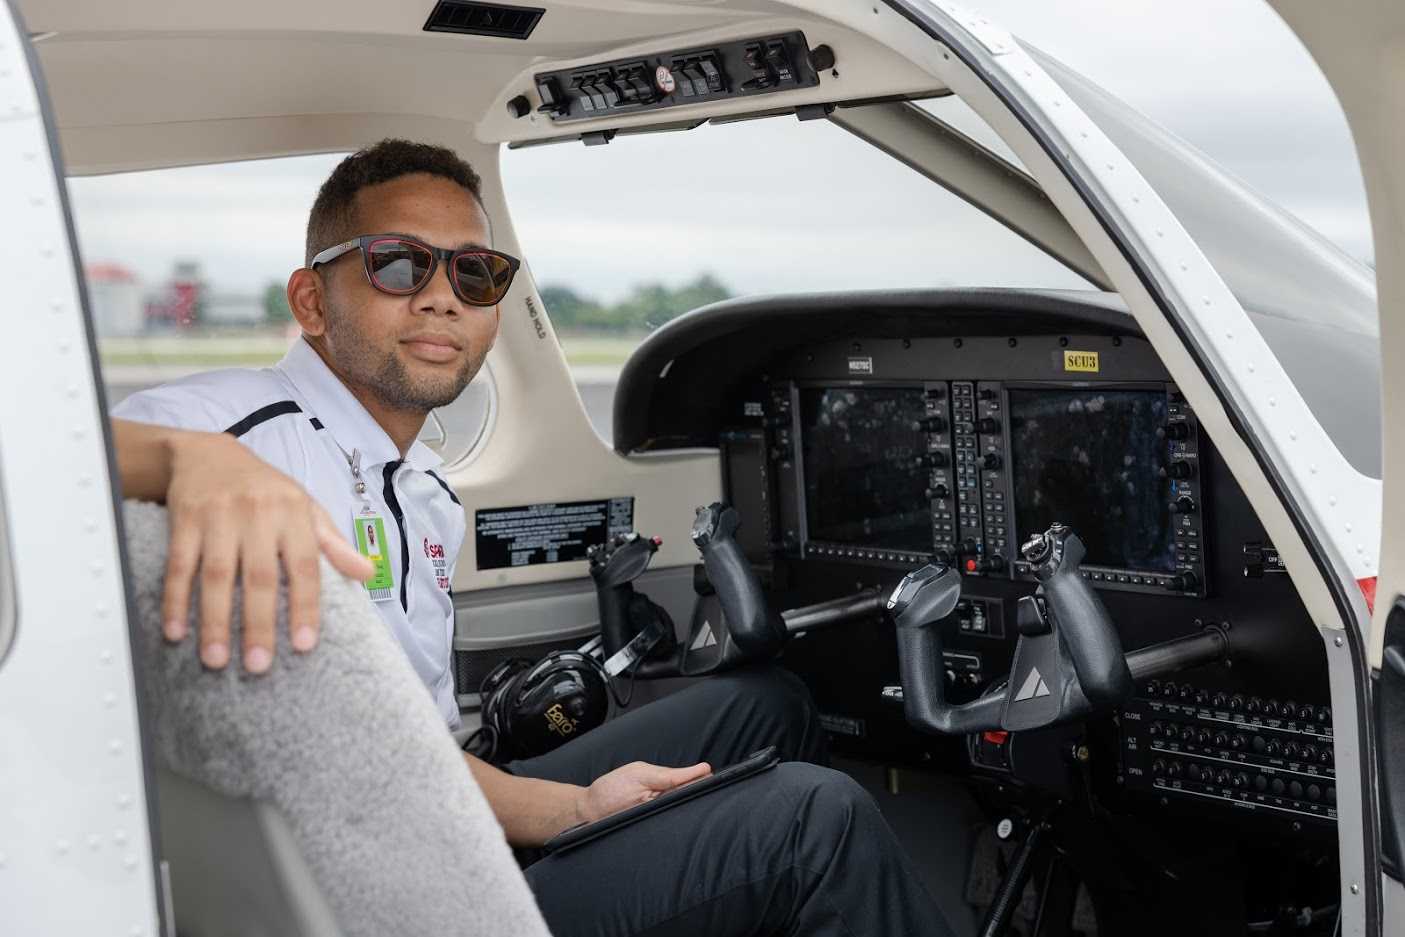 SkyWest Pilot Career Pathway at Spartan College